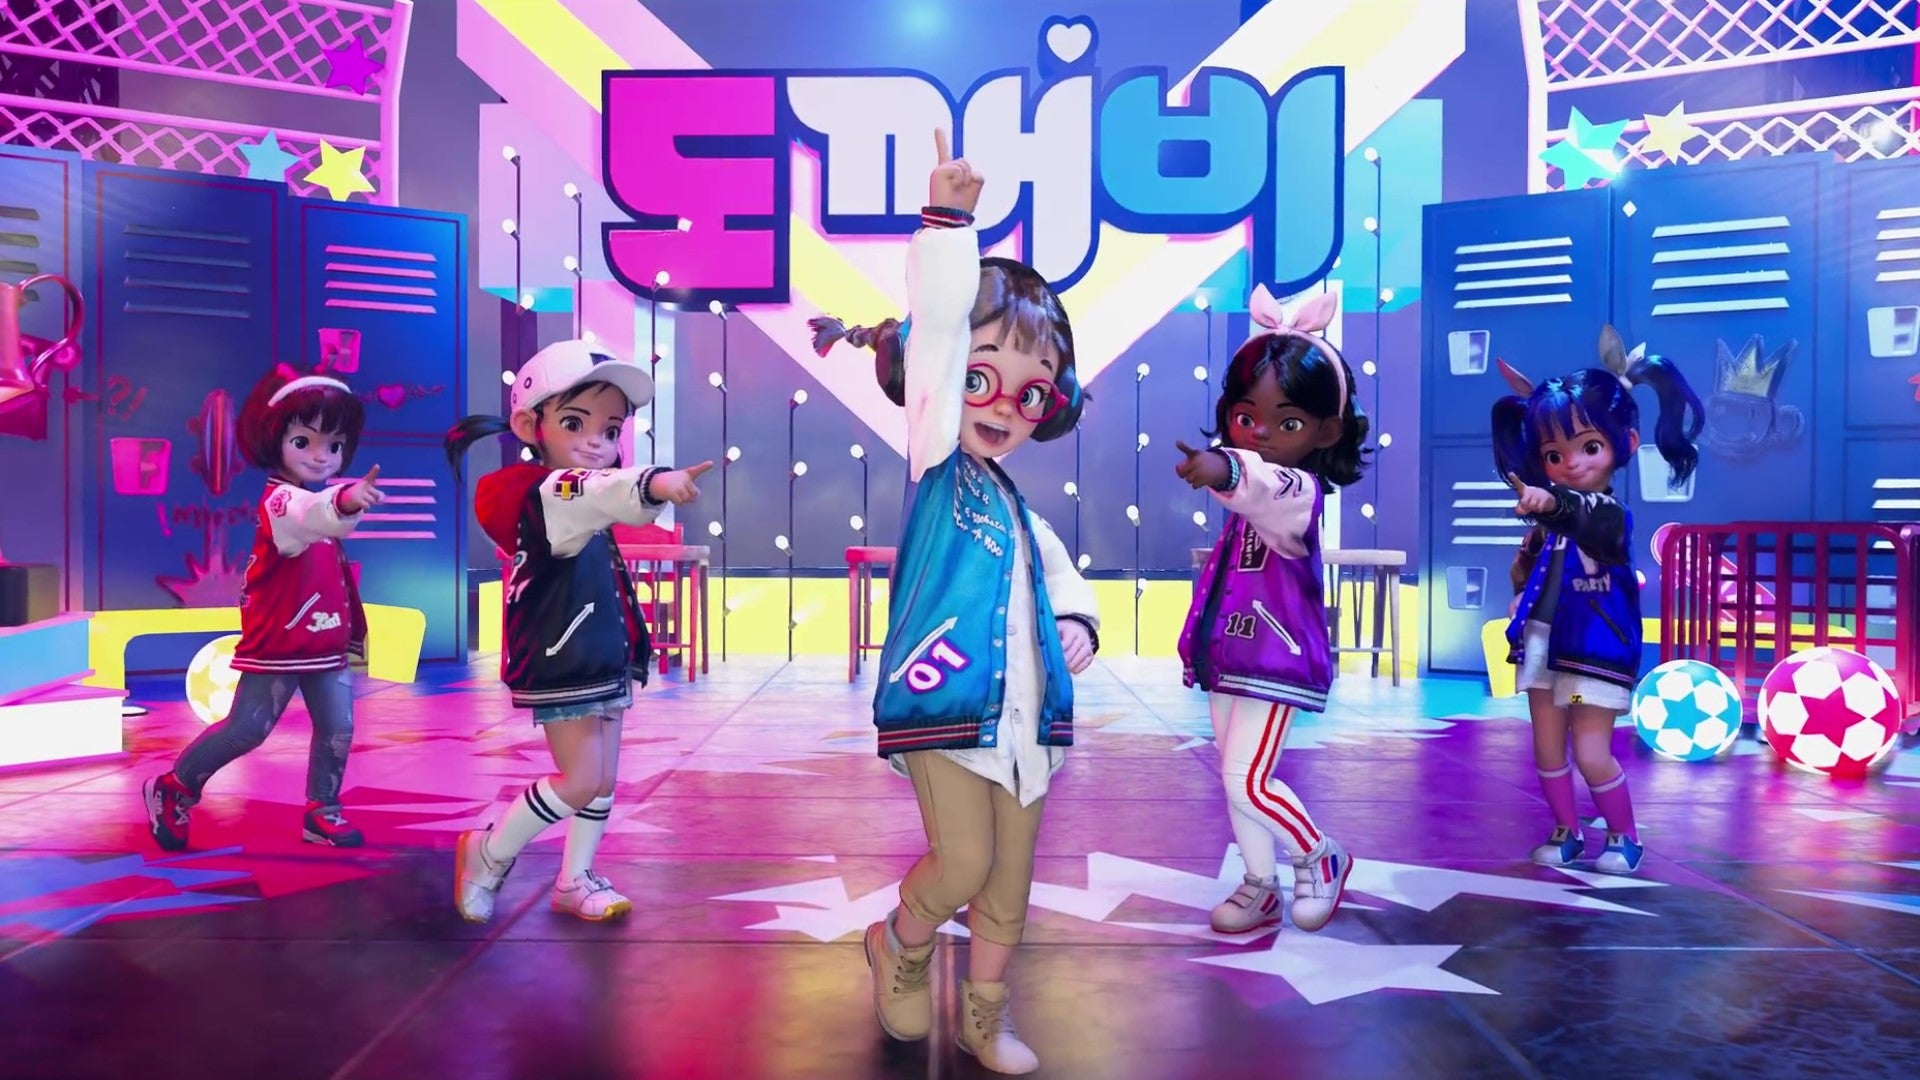 Kids from DokeV perform K-Pop dances on stage.